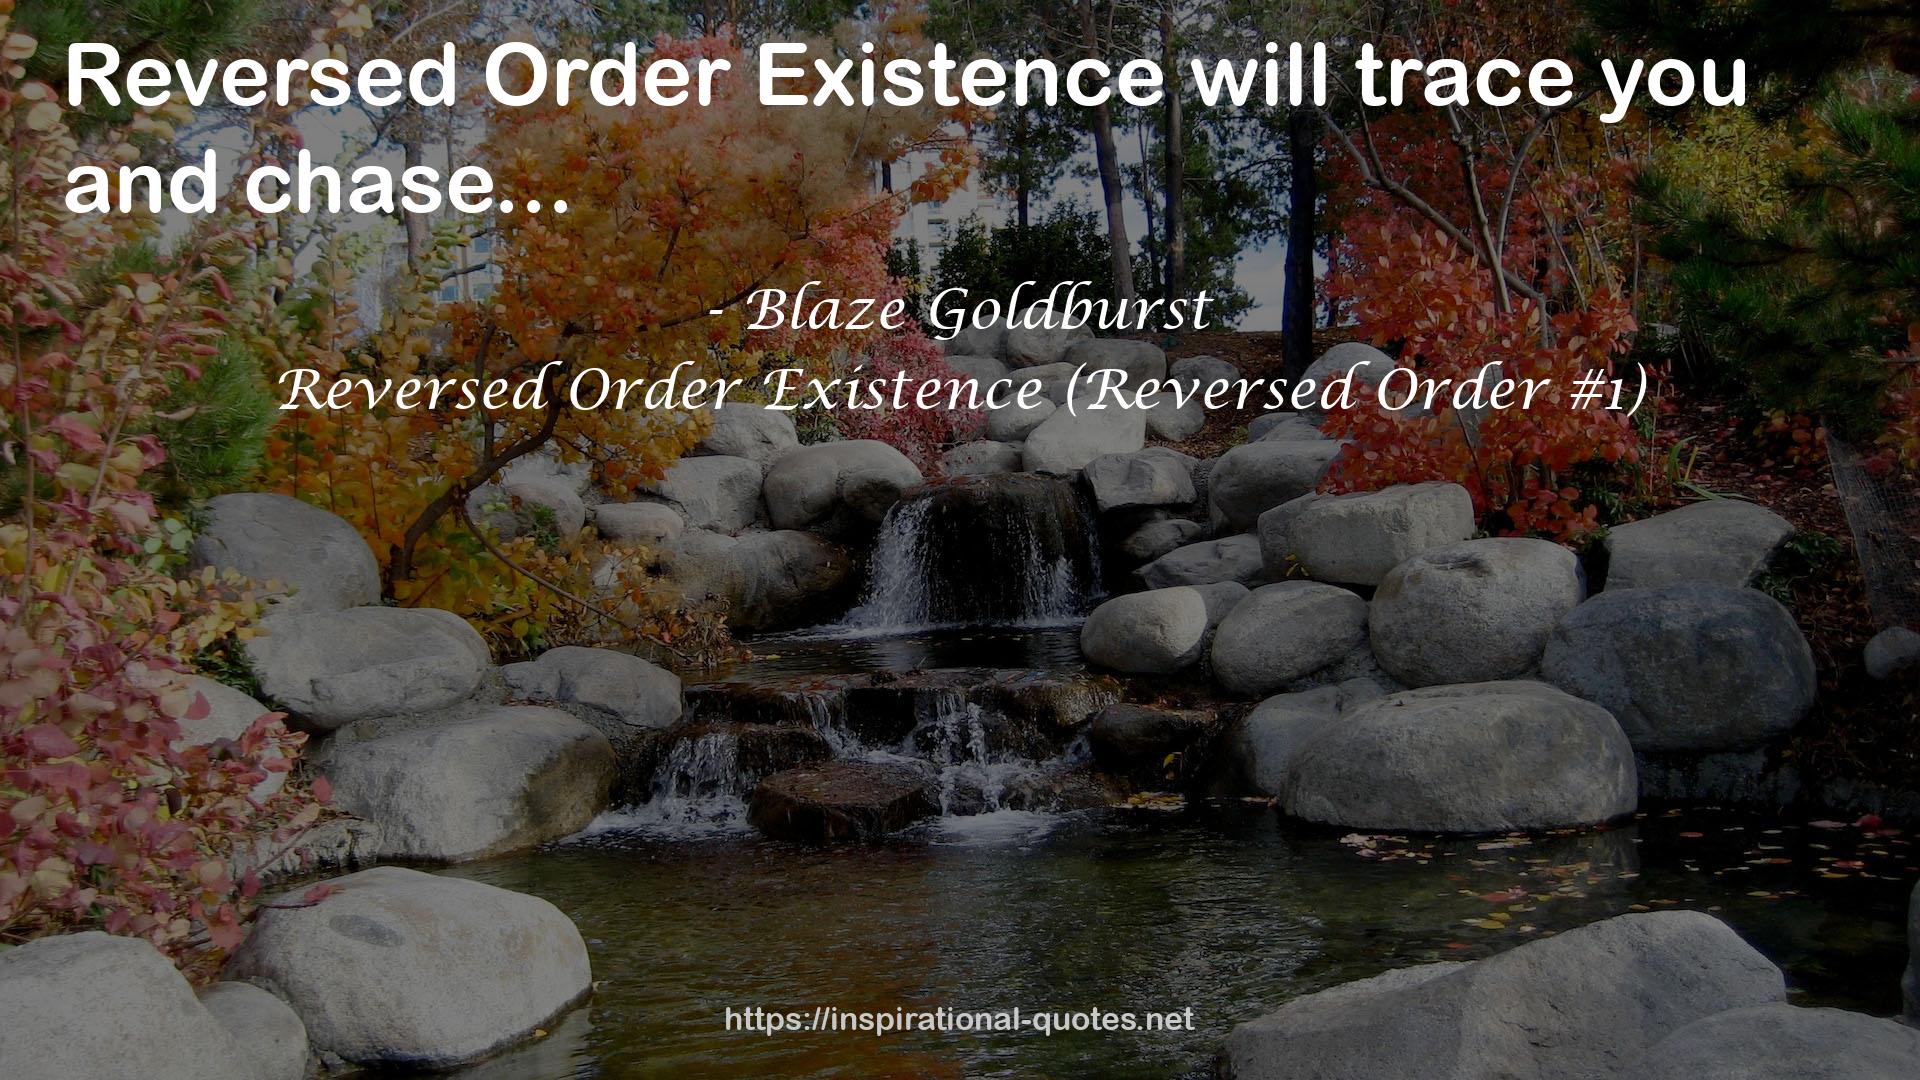 Reversed Order Existence (Reversed Order #1) QUOTES